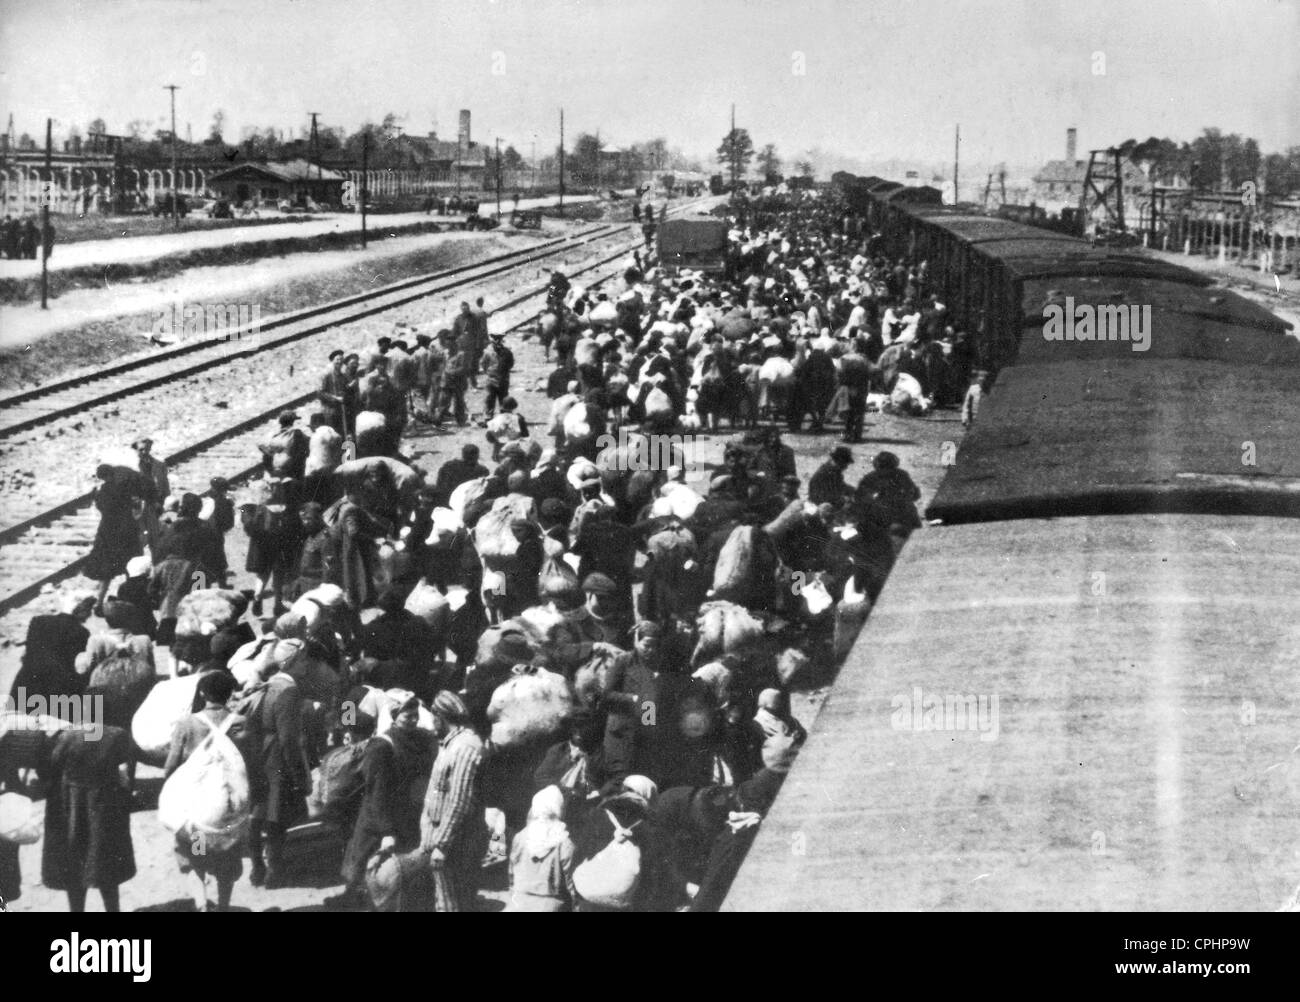 Arriving Jews on the 'ramp' at Auschwitz concentration camp, 1944 (b/w photo) Stock Photo